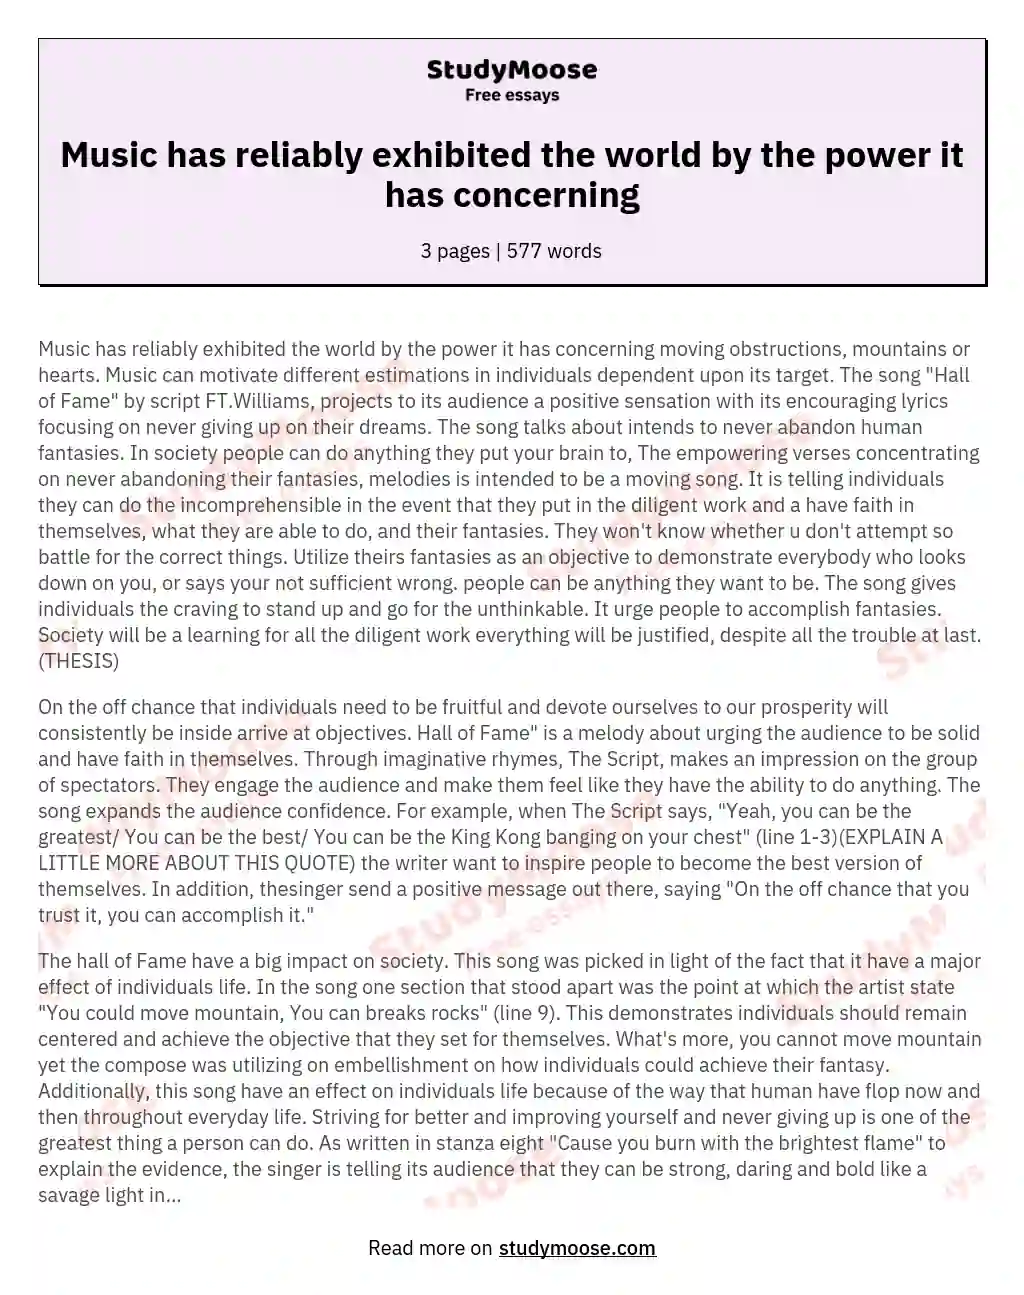 Music has reliably exhibited the world by the power it has concerning essay